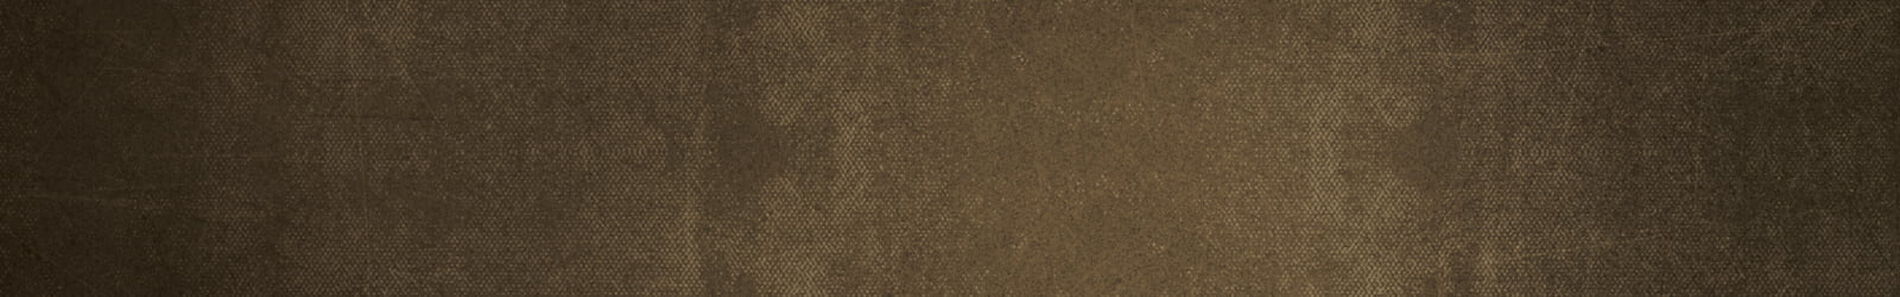 Tan background with dark gray edges